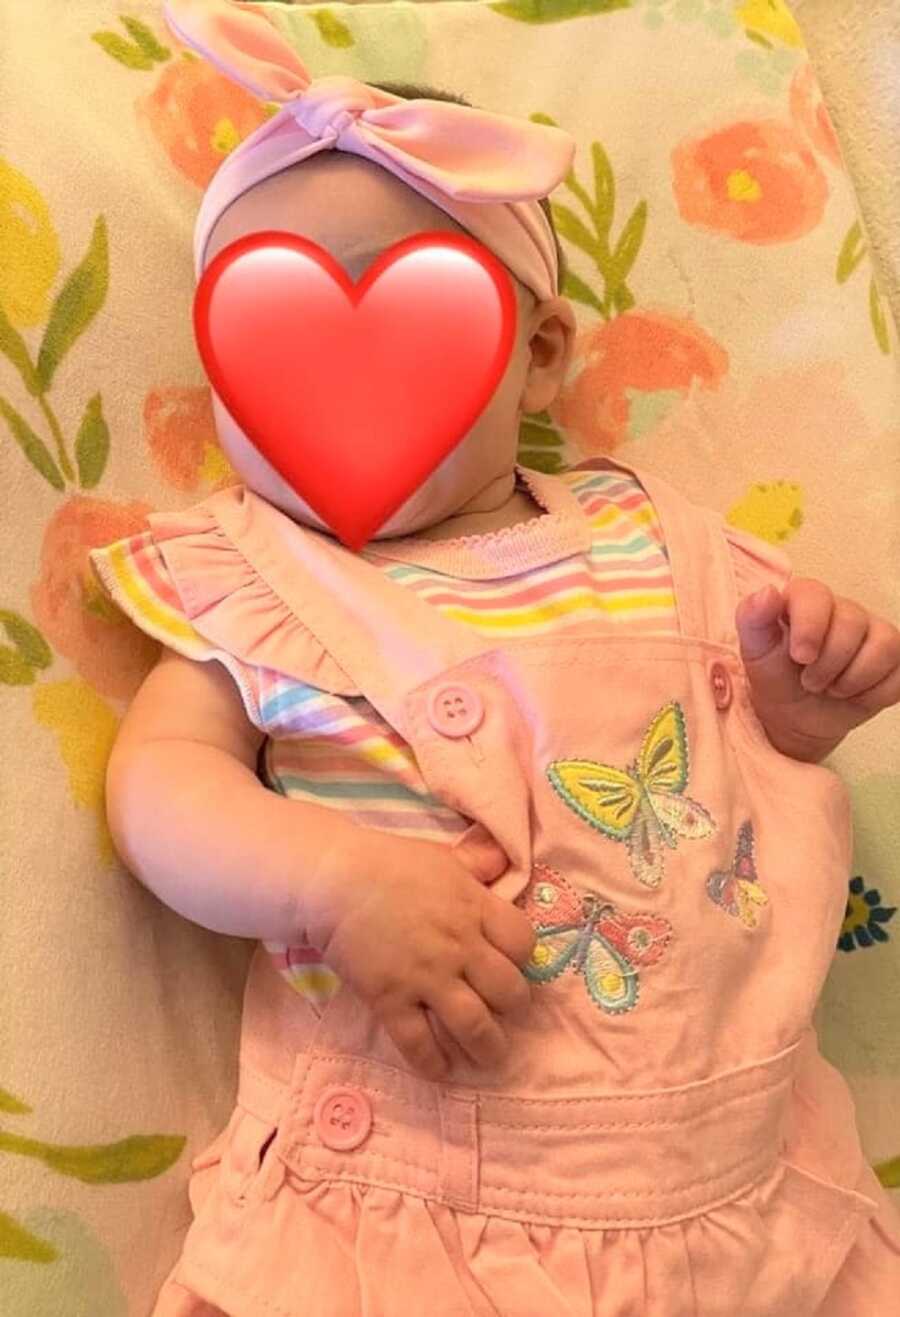 foster baby girl in pink overall dress